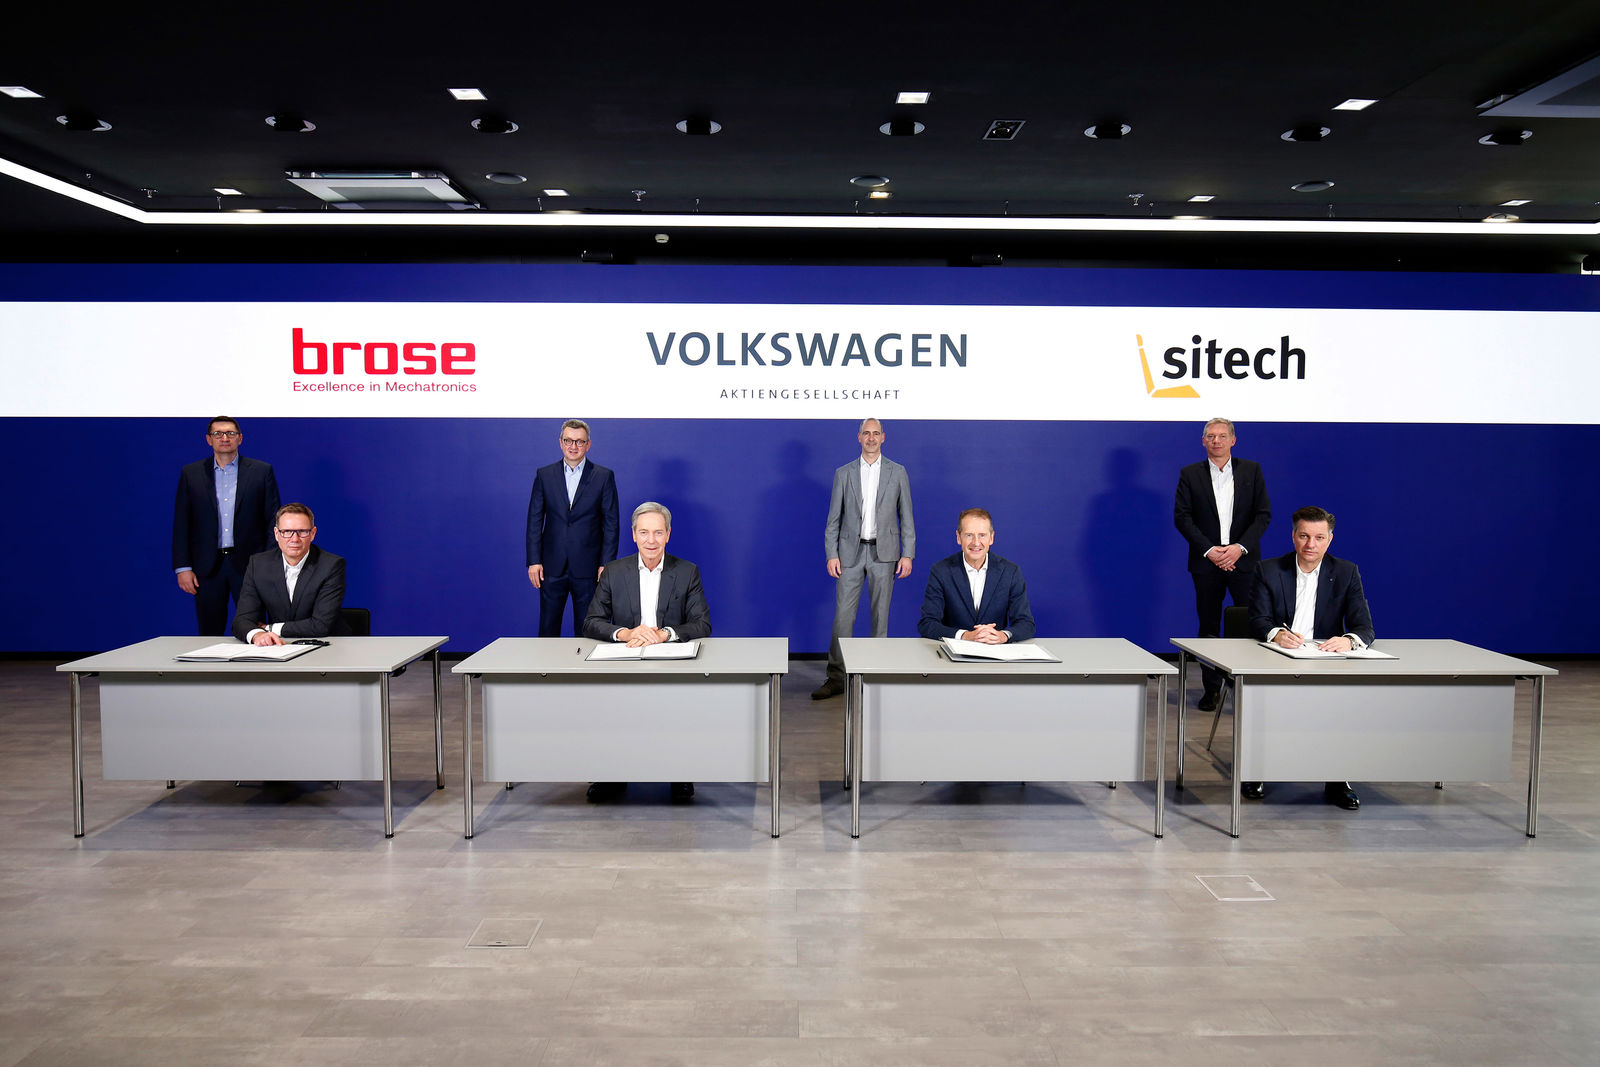 Brose and Volkswagen AG sign joint venture agreement